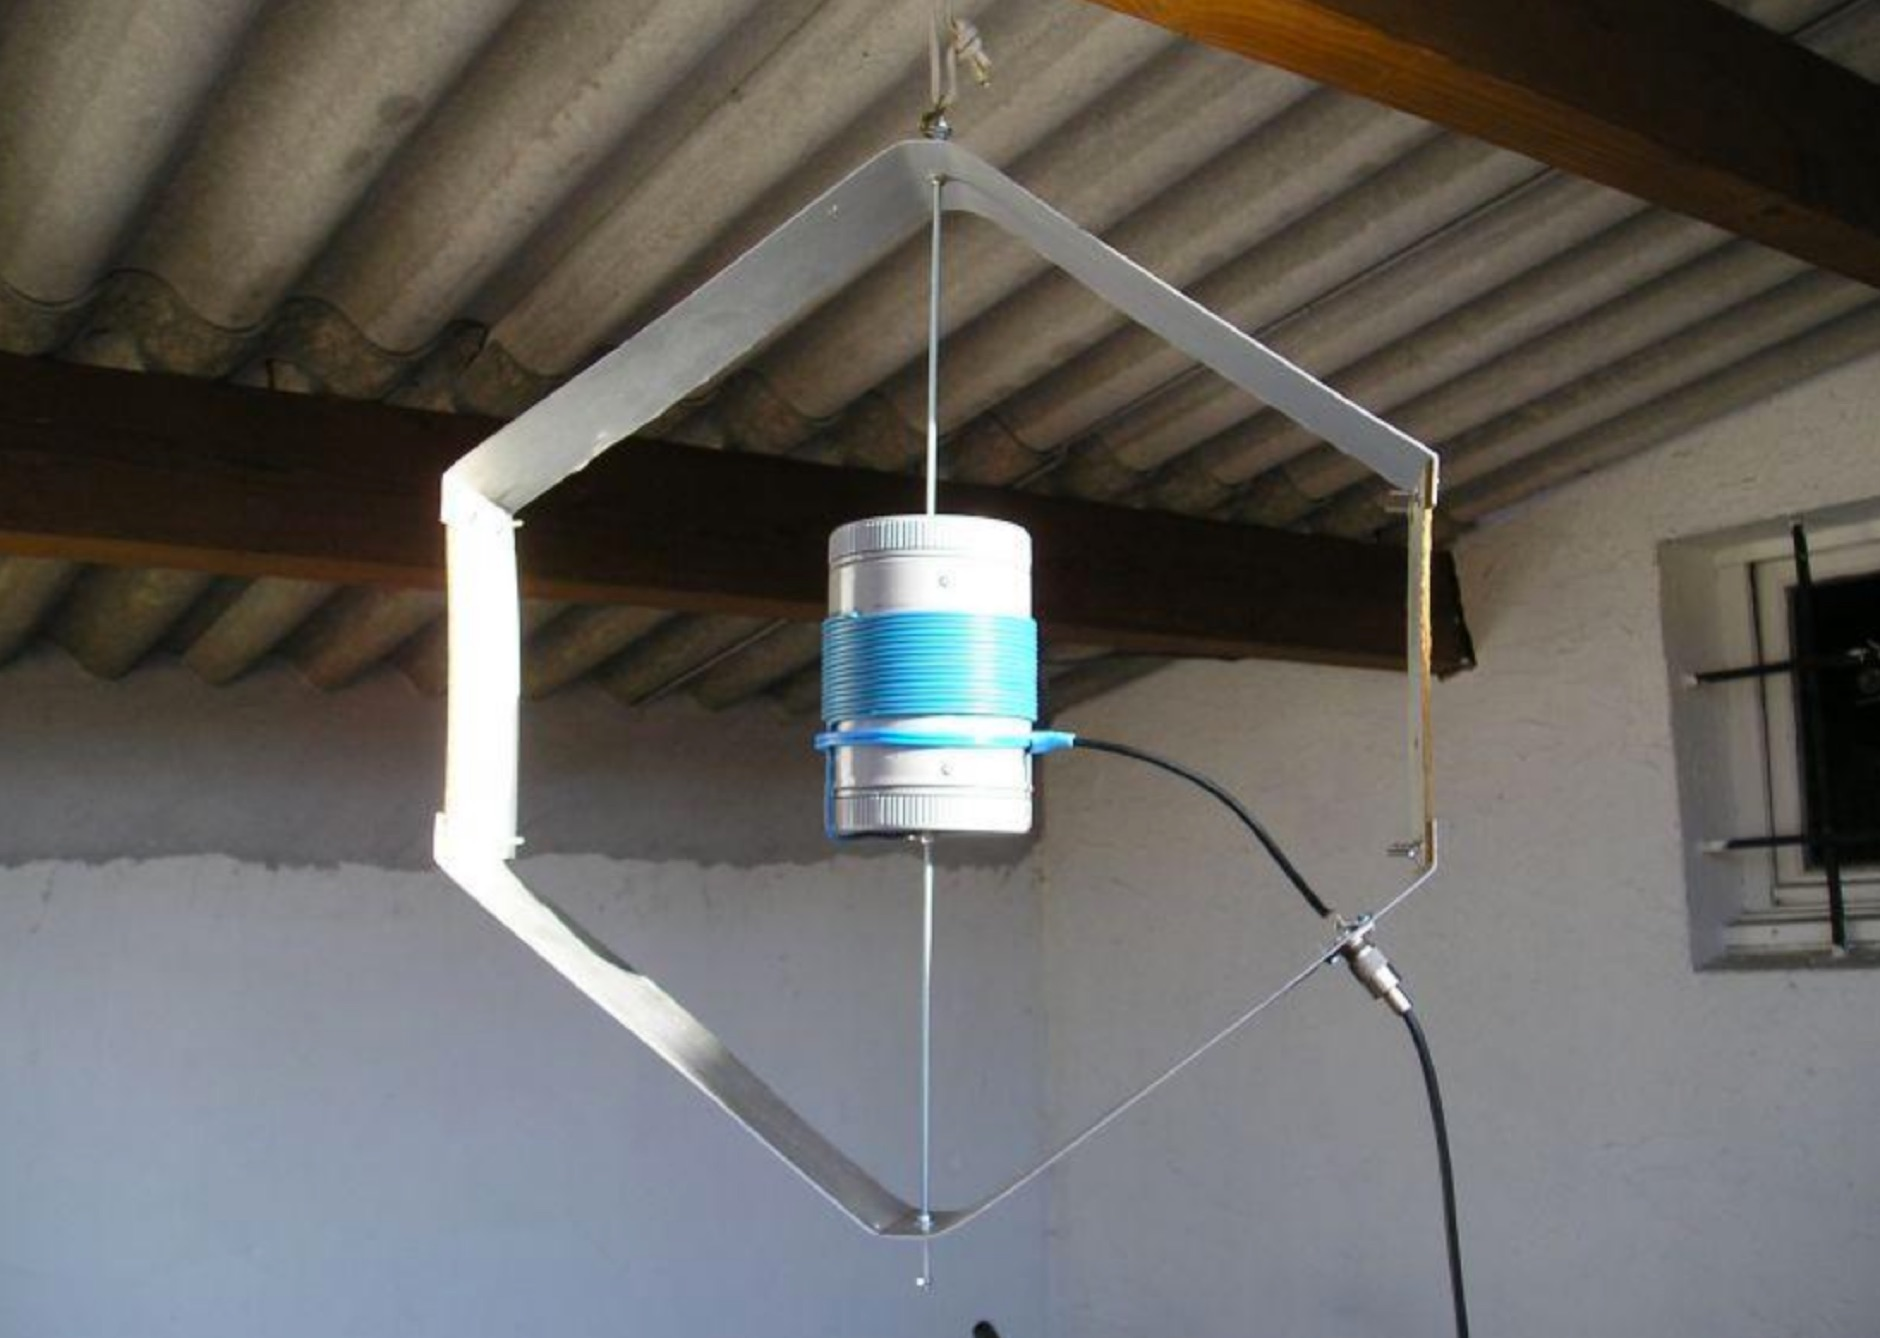 Reply to the post “Why are antennas needed and how do they work - Just about the complicated stuff” - Antenna, Radio, Radio amateurs, Longpost, Reply to post